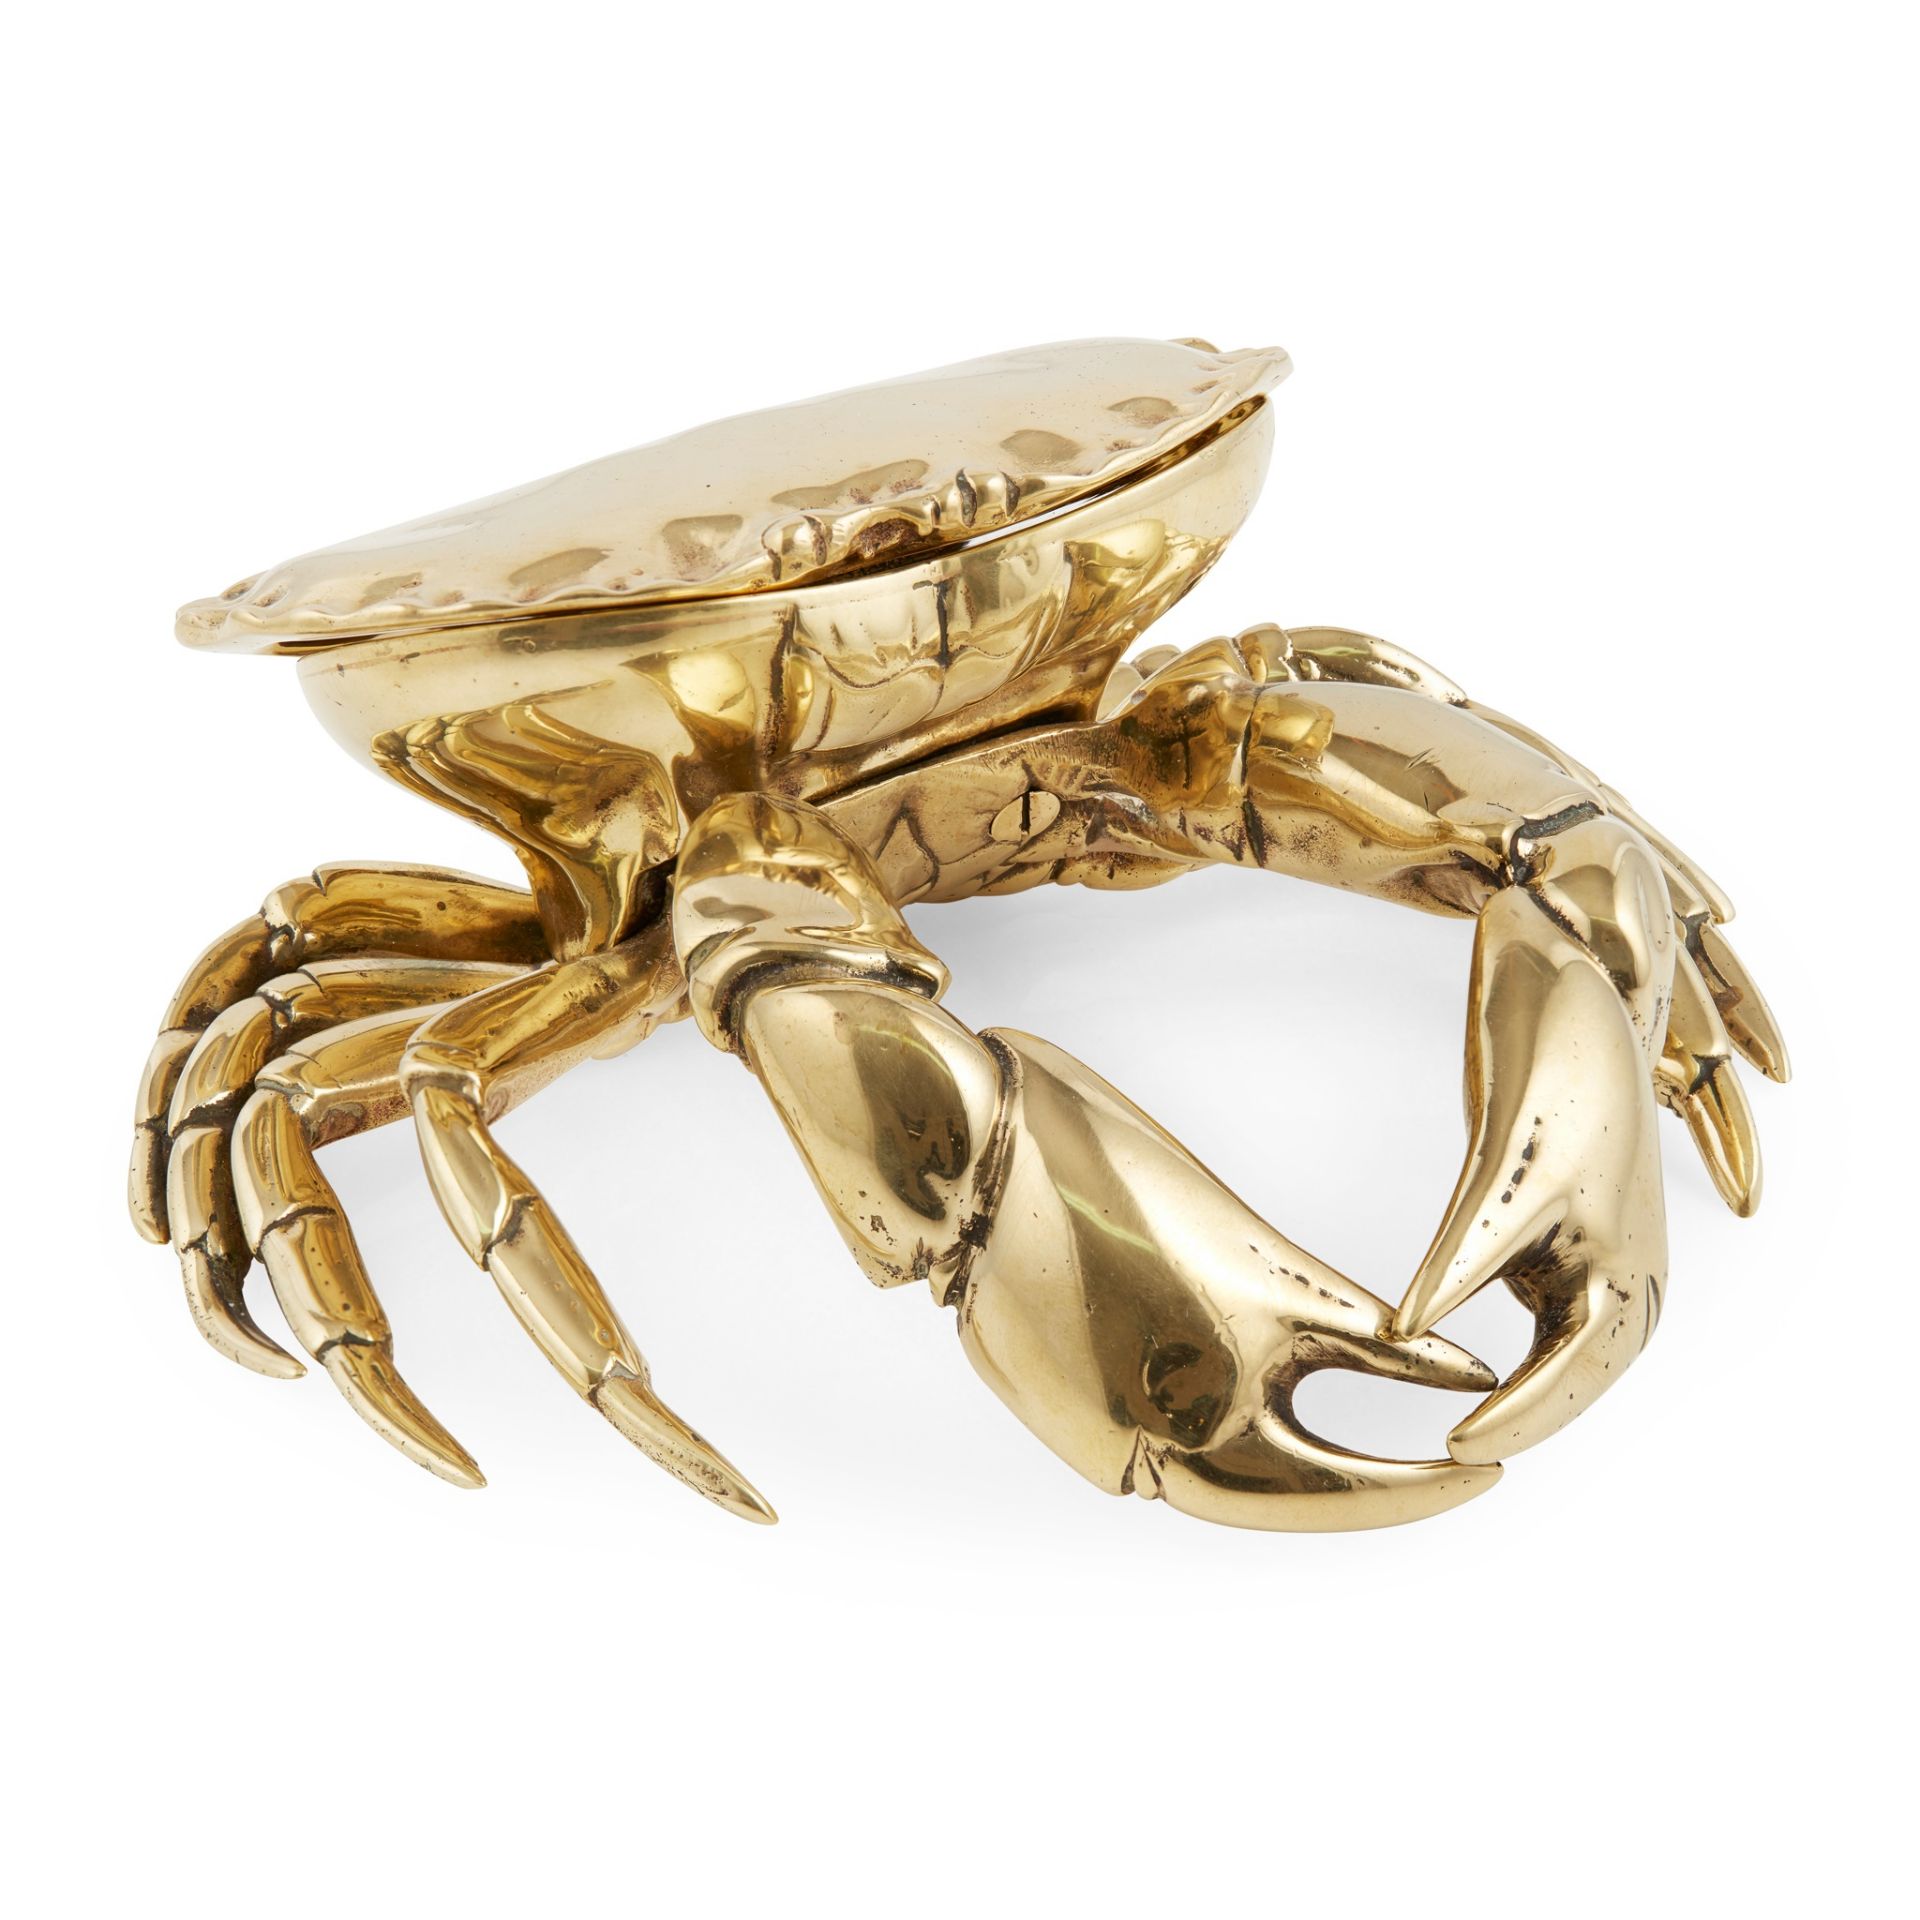 NOVELTY BRASS CRAB INKWELL LATE 19TH CENTURY